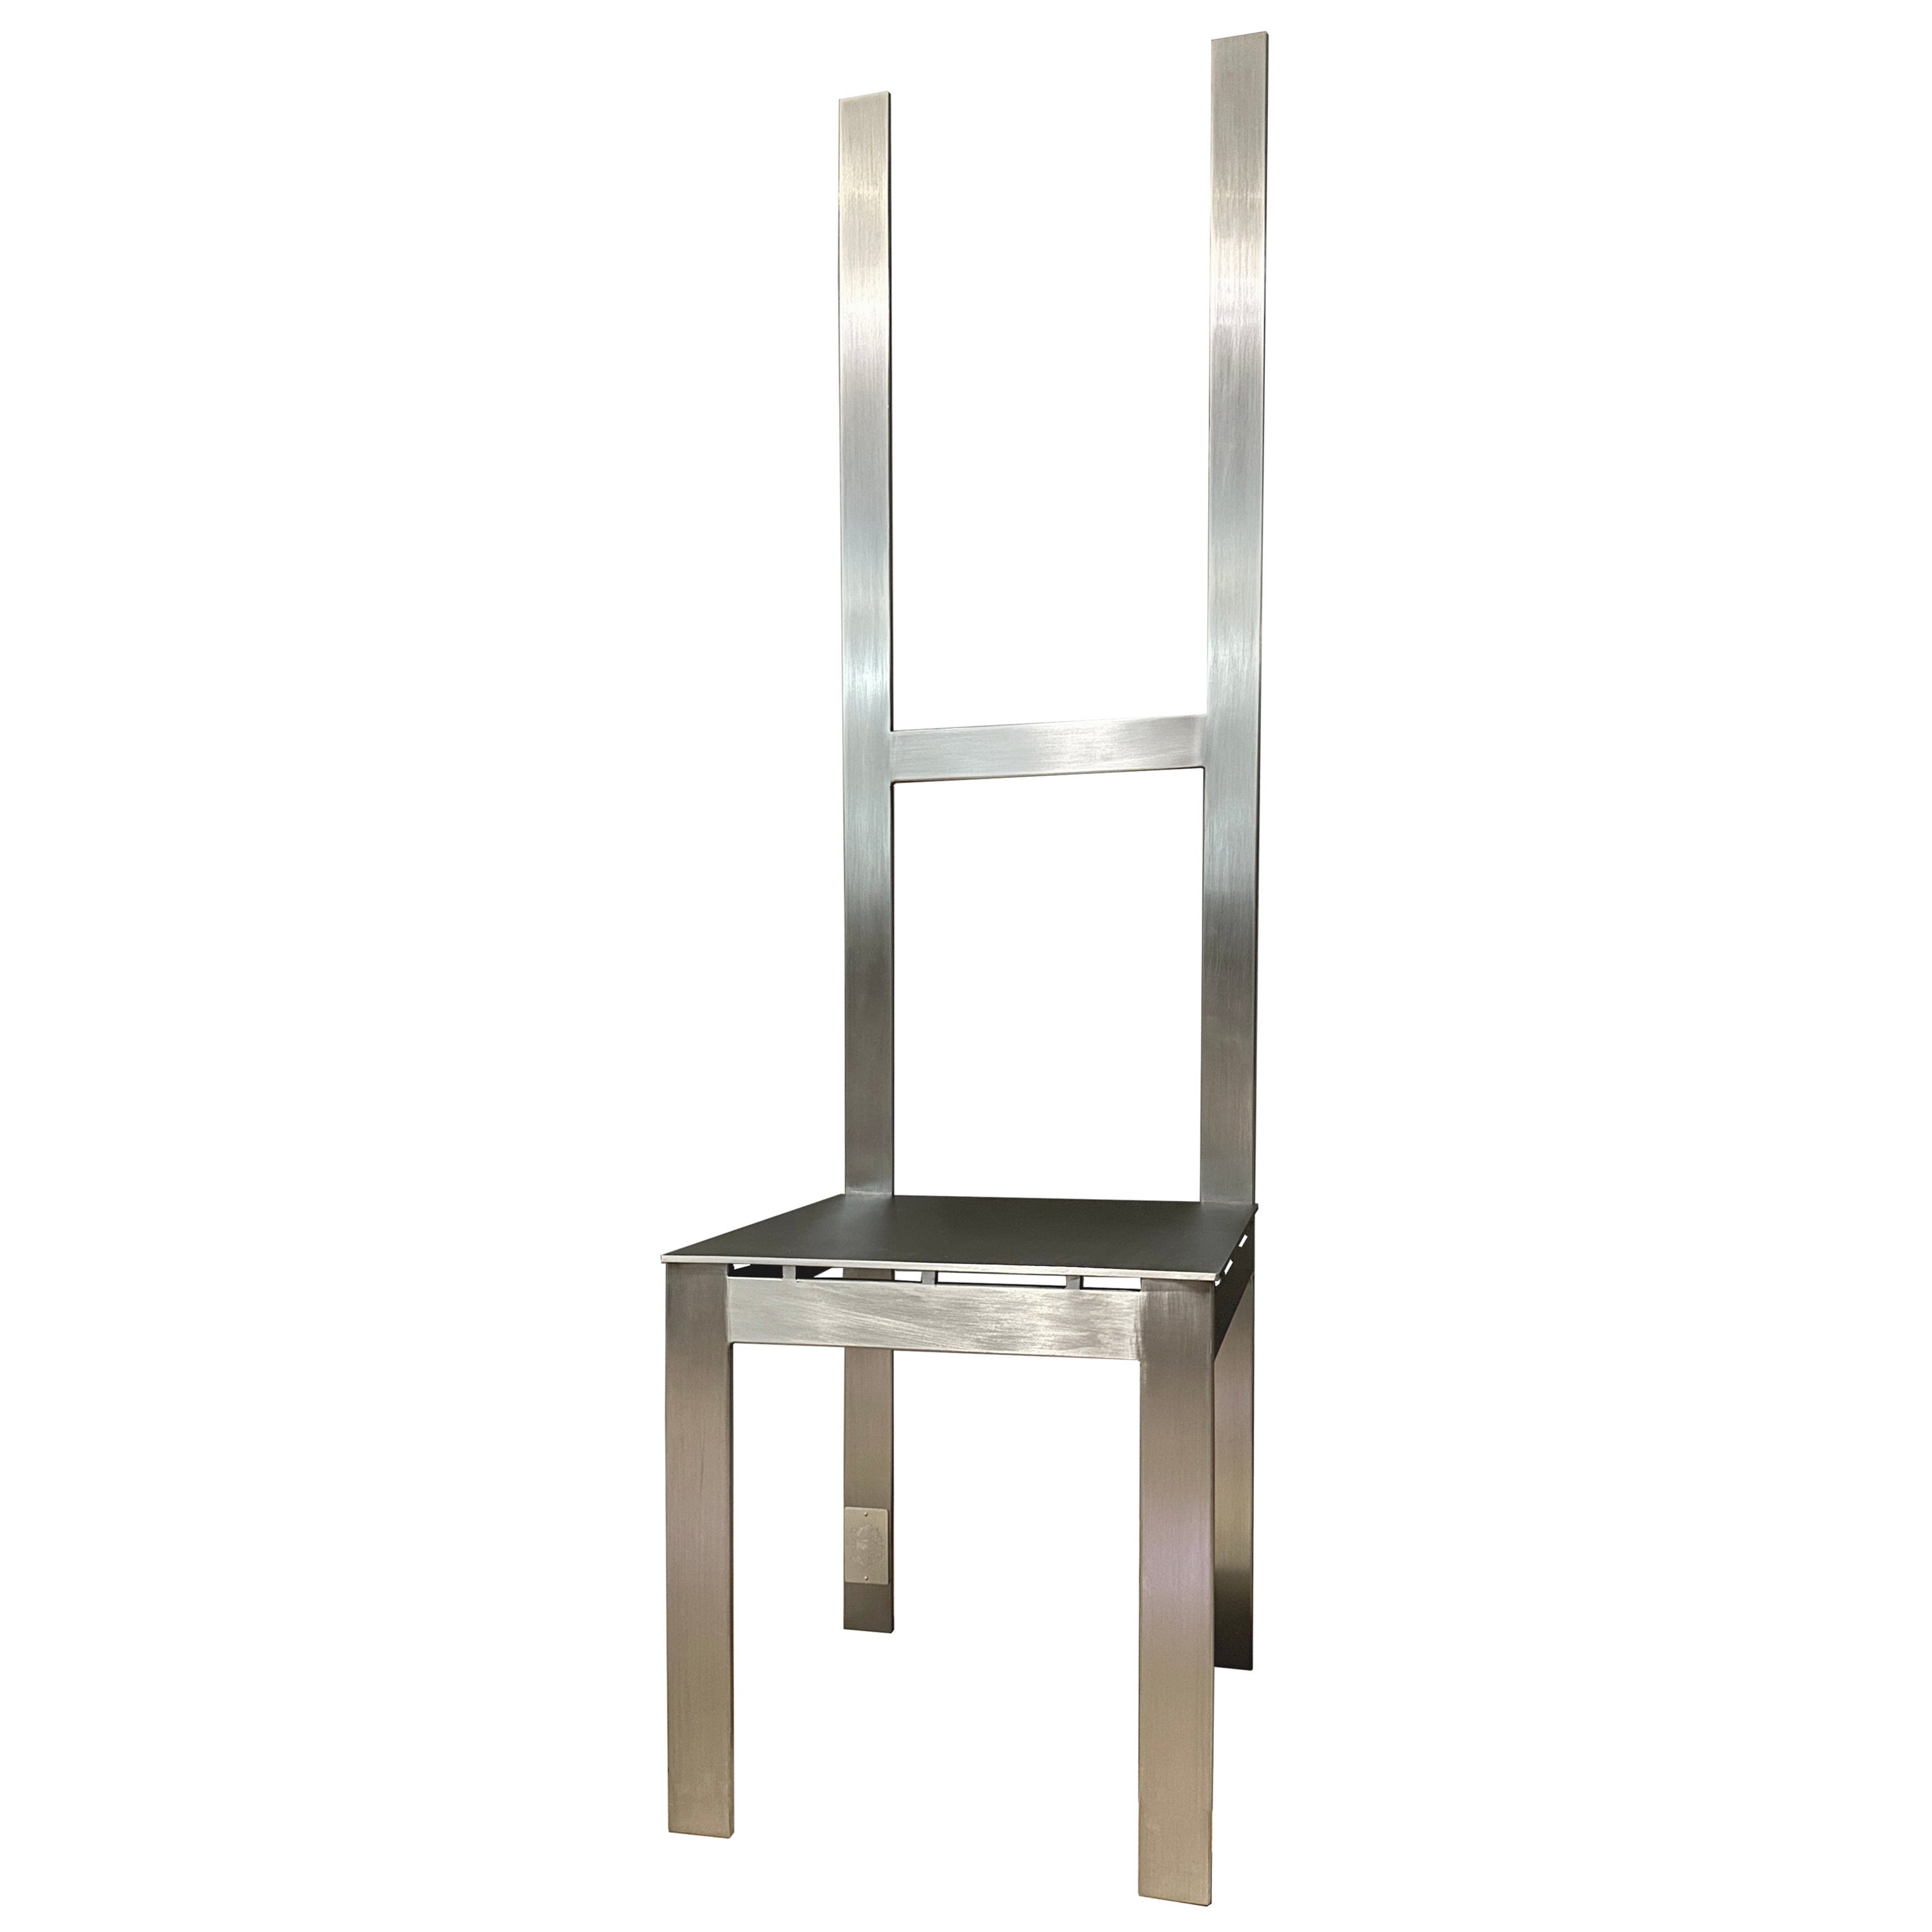 “Big Iron” Dining Chair, Iron, James Vincent Milano, Italy, 2023